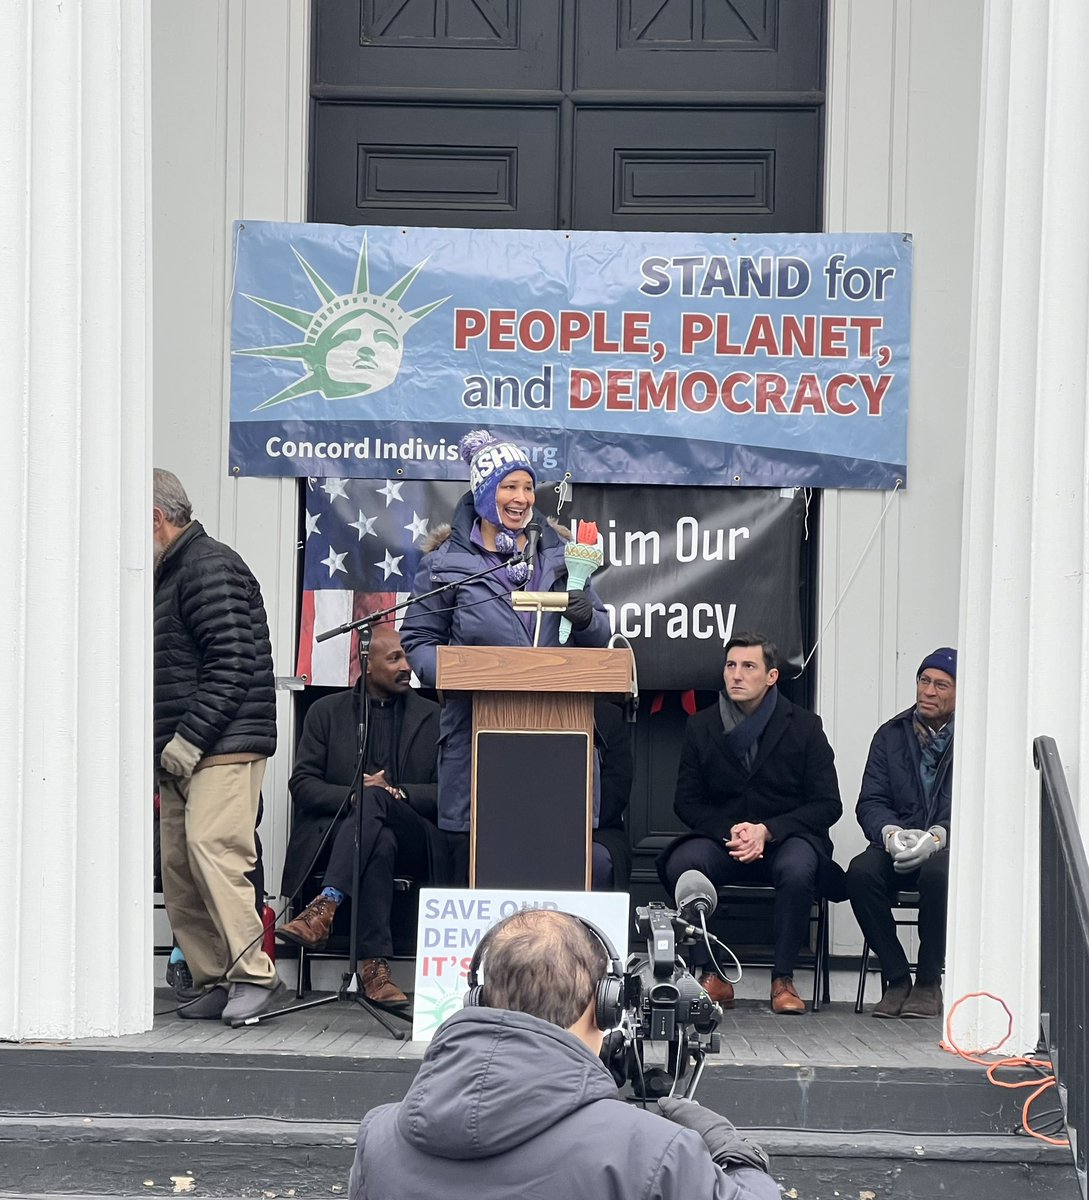 After an extraordinary tale of turning fury from a stranger into mutual understanding and appreciation, @dsallentess told the crowd, “Fight with love, my friends. Fight with love.” Wonderful to hear Danielle Allen at today’s @ConcordIndivis1 Rally for Democracy. #mapoli #Jan6th